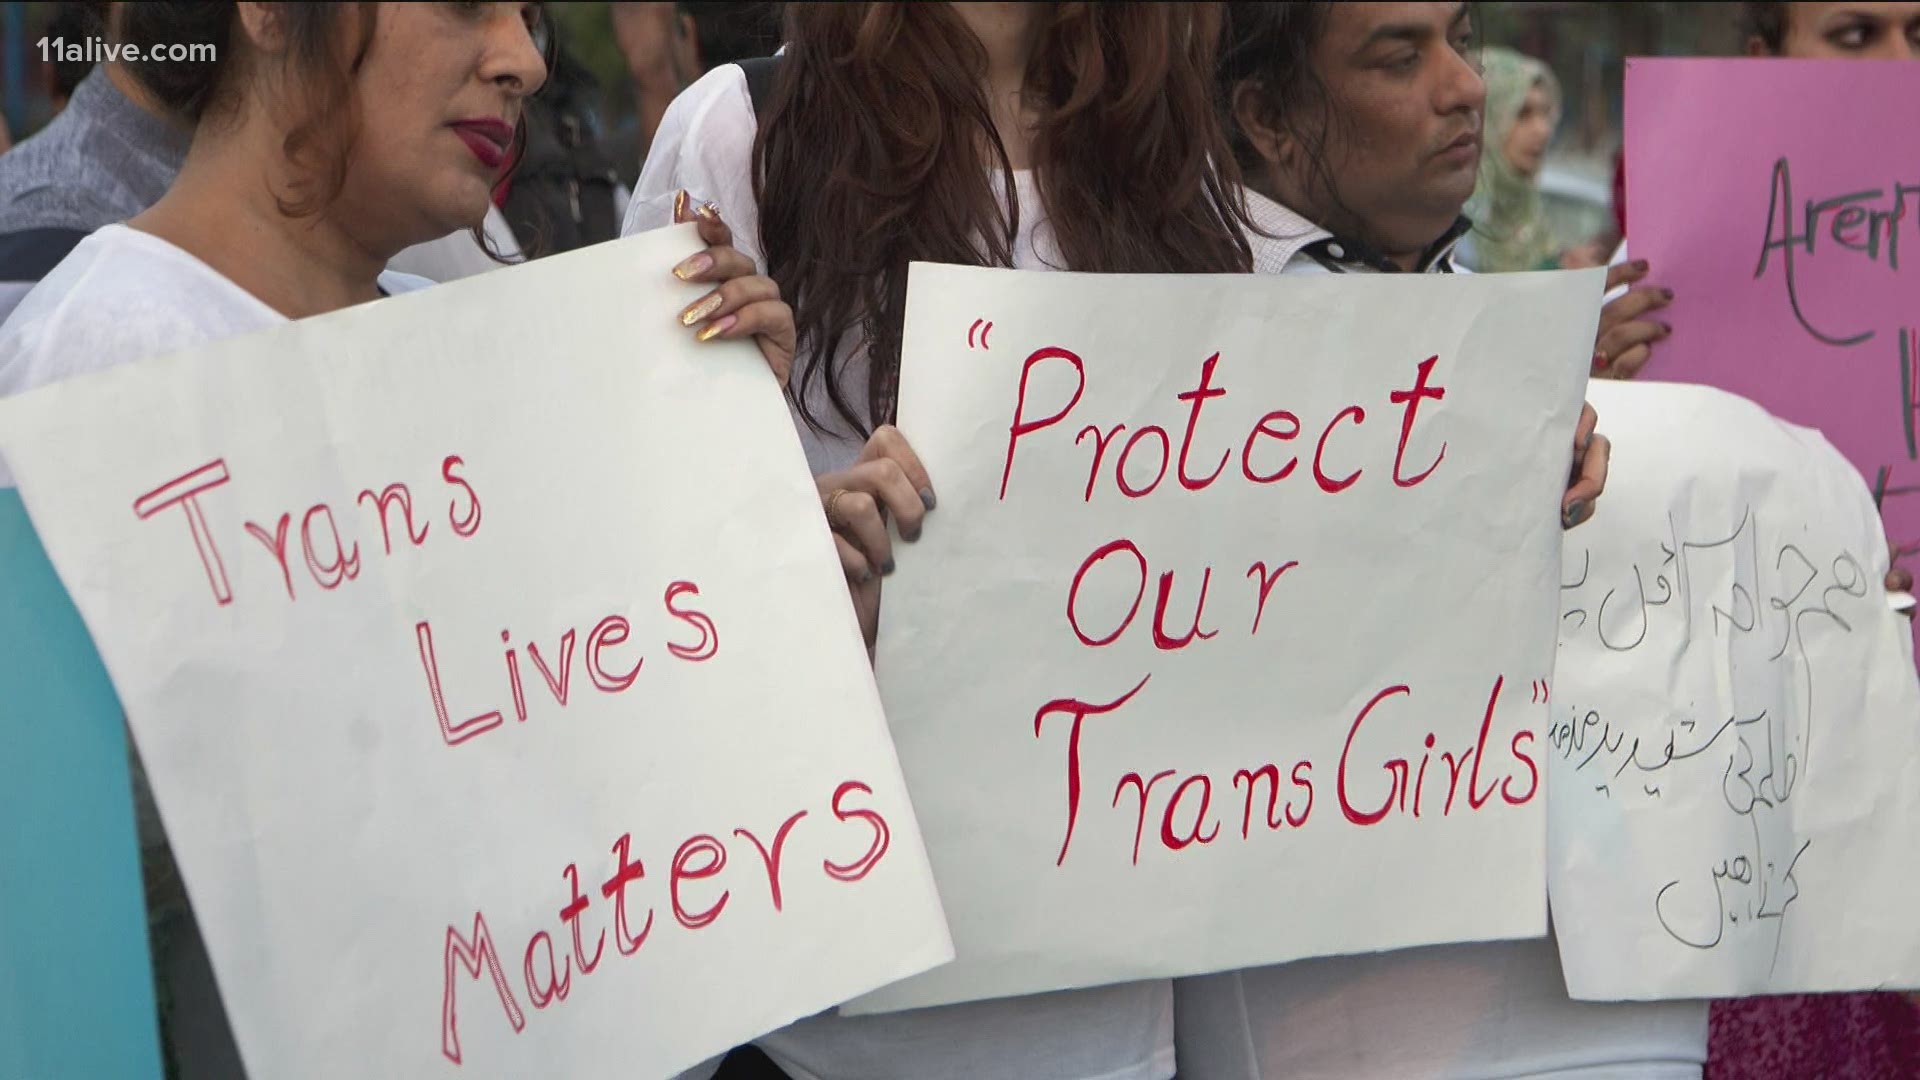 At least 33 transgender people violently killed this year, according to the Human Rights Campaign.